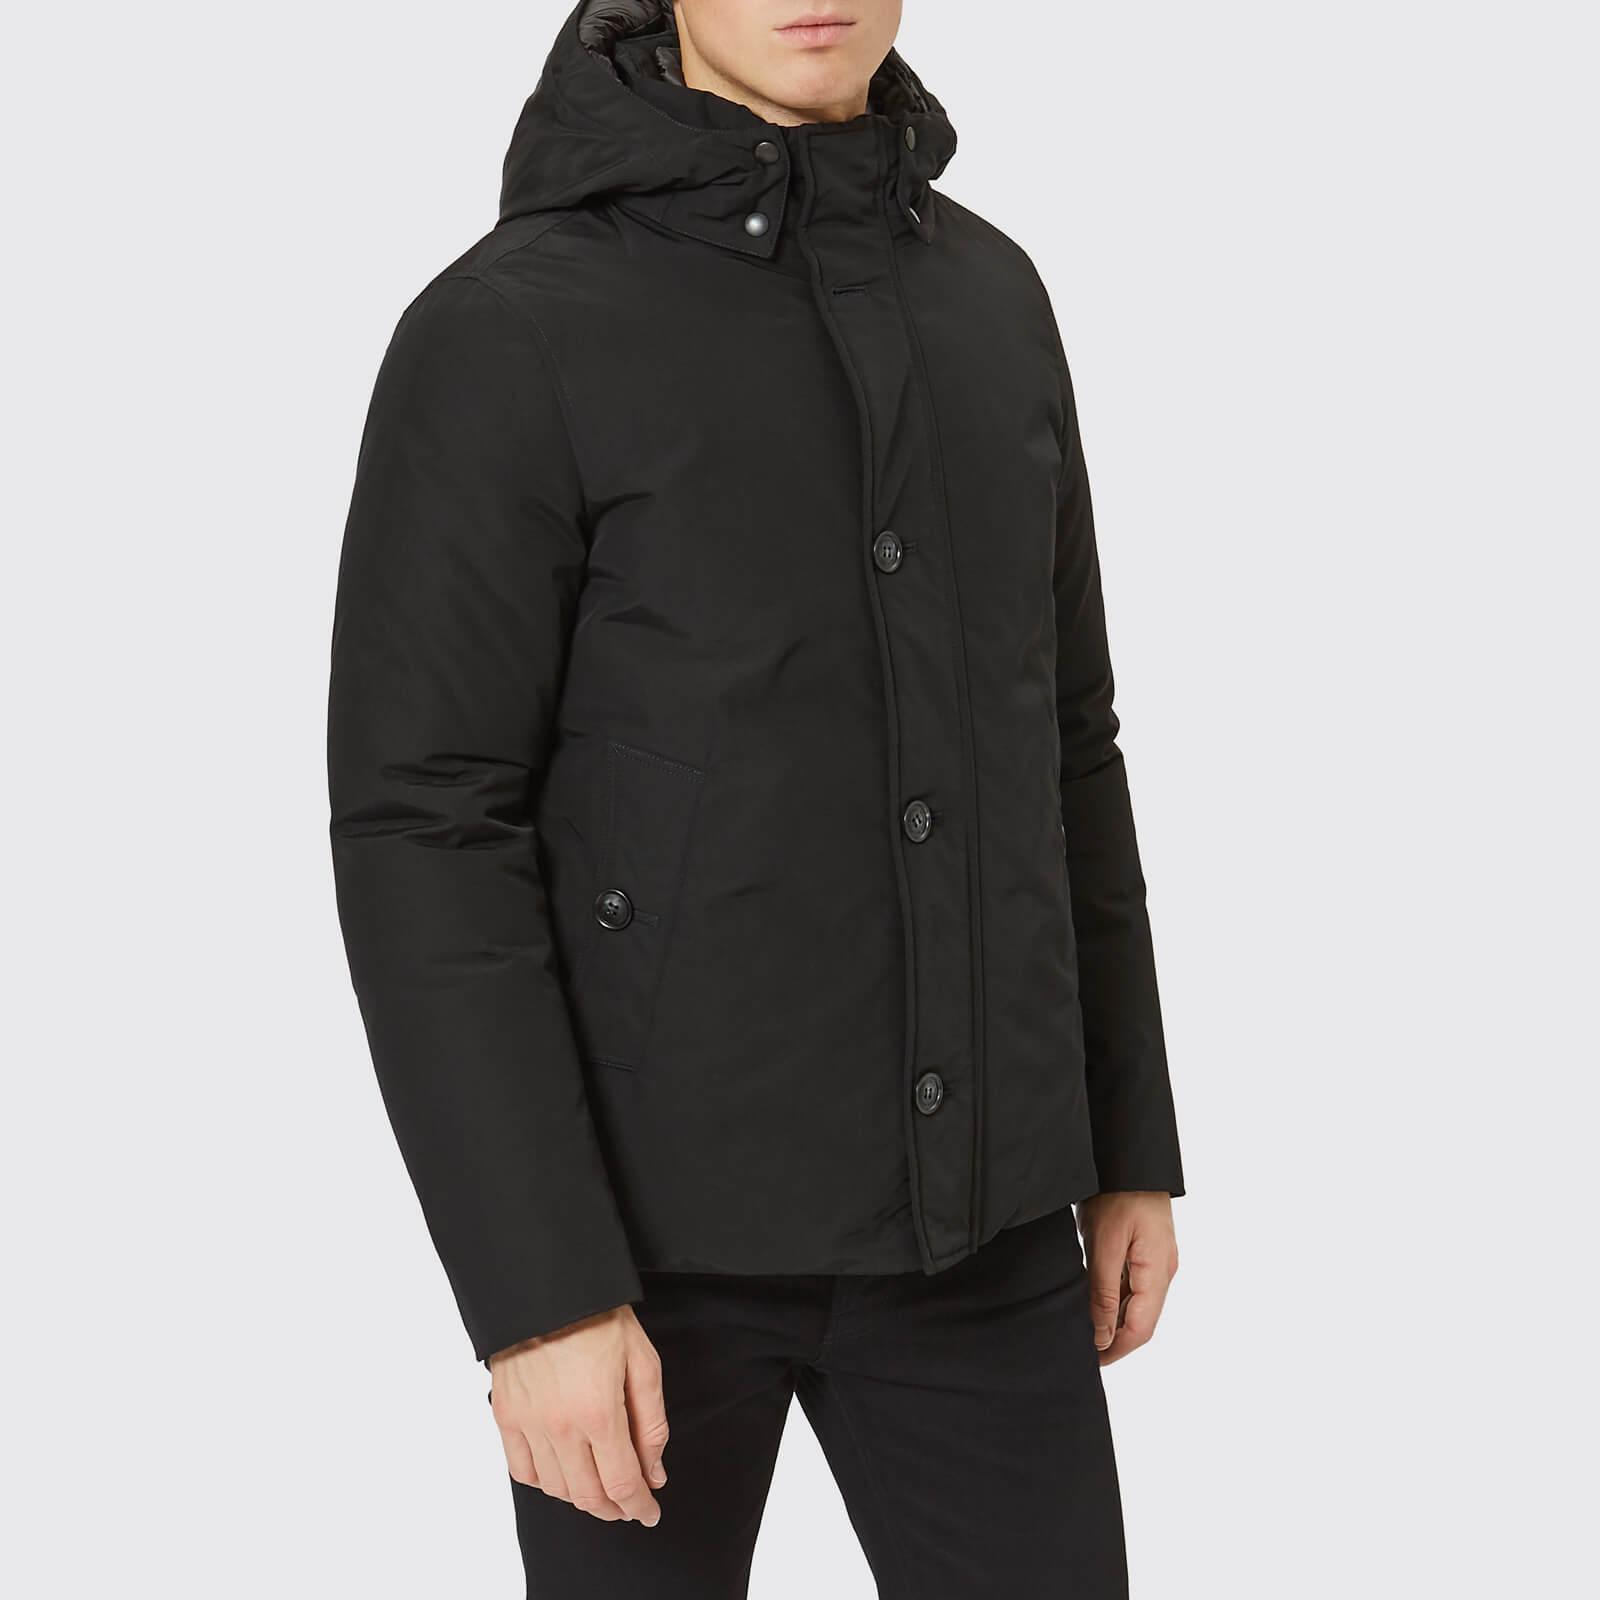 Woolrich Cotton South Bay Jacket in Black for Men - Lyst